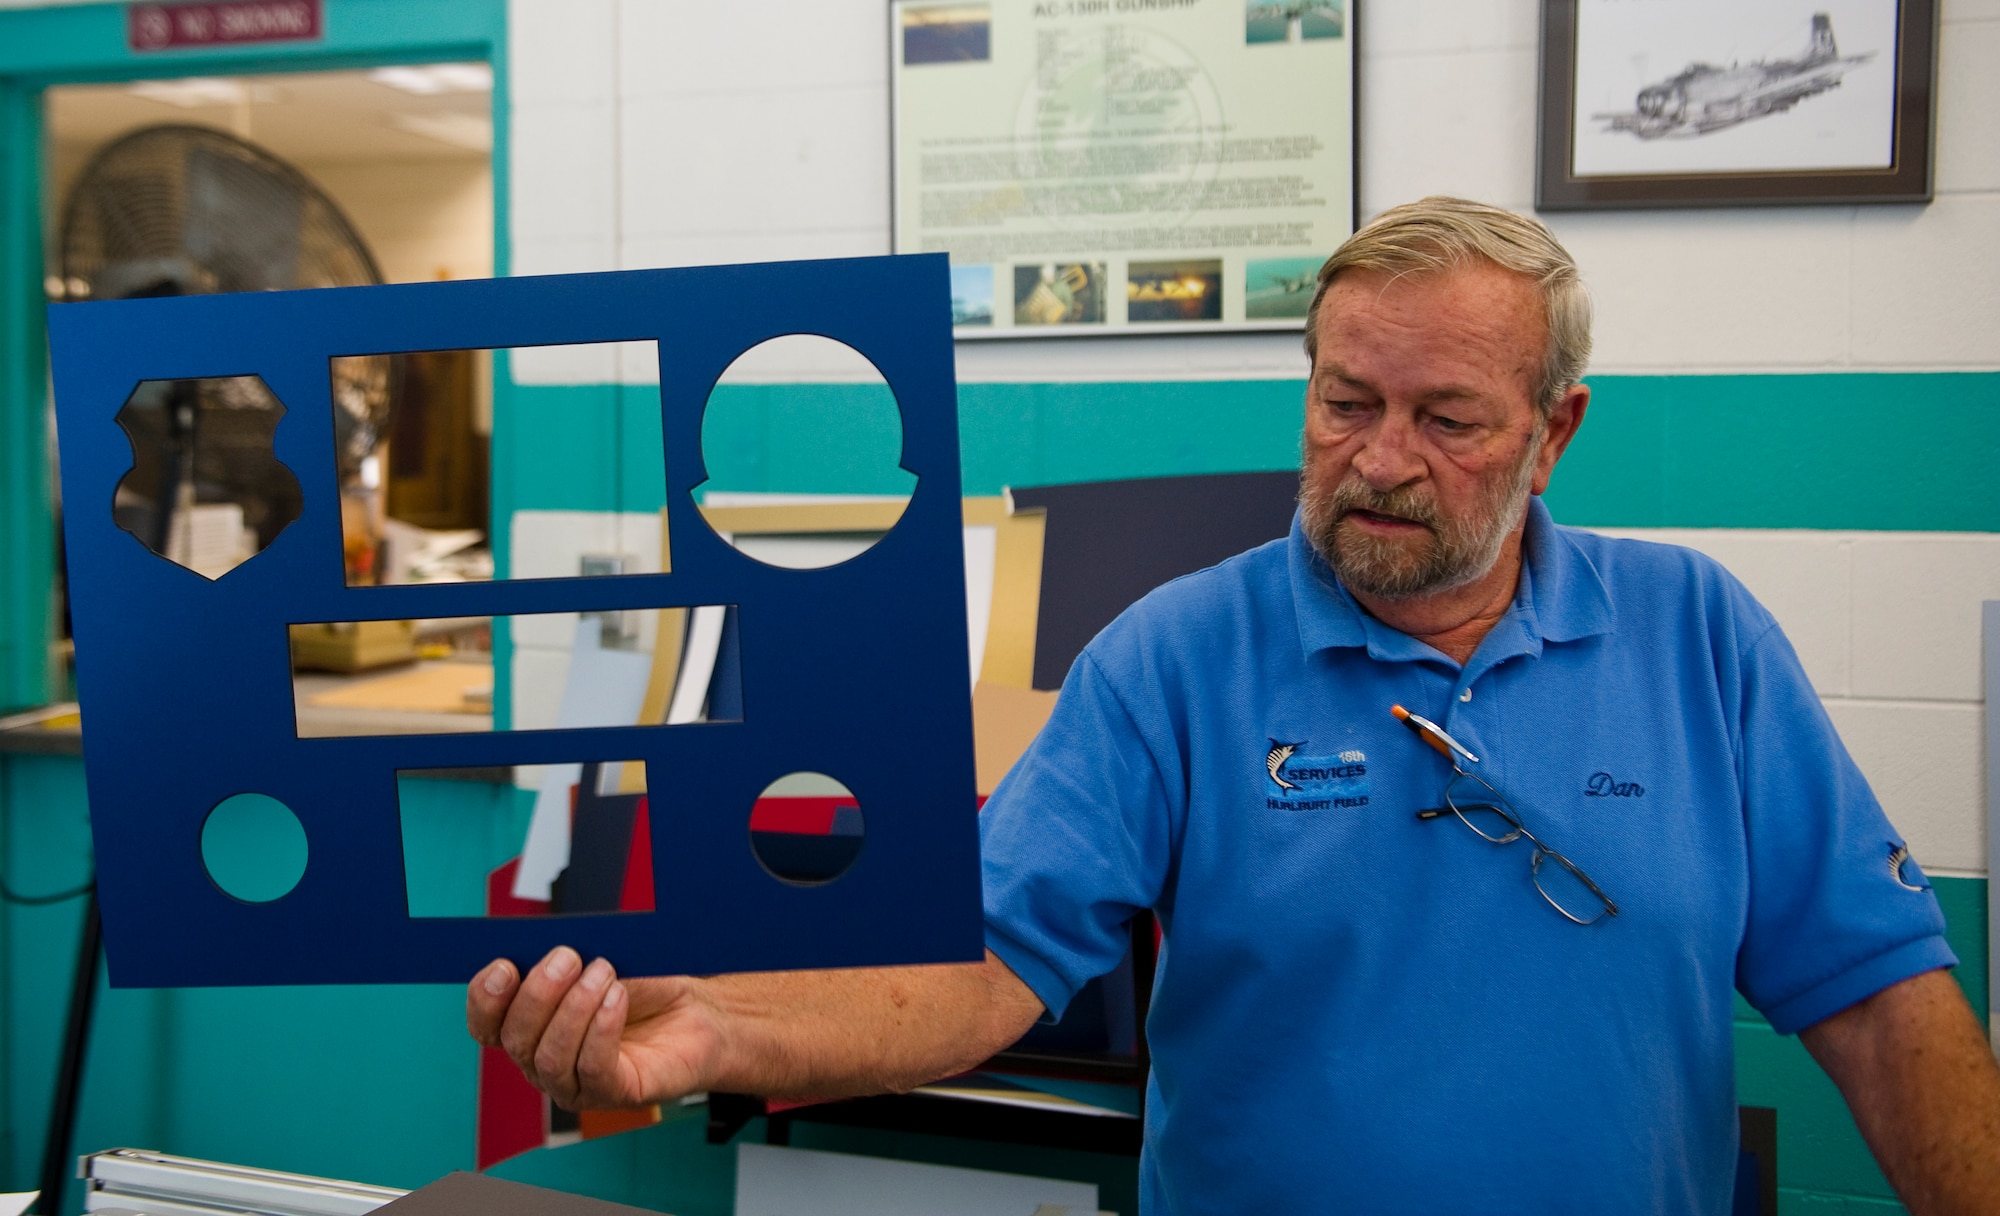 Dan Ruddell, manager of The Frame shop, holds up a final foam-board cut out that he just finished working on at The Frame Shop on Hurlburt Field, Fla., Oct. 12, 2012. The frame shop comes equipped with metal and wood frames in a large selection of materials and colors, foam-core back-boards, frame hardware and a variety of glass which includes standard and non-glare glass. (U.S. Air Force photo/Airman 1st Class Christopher Williams)
